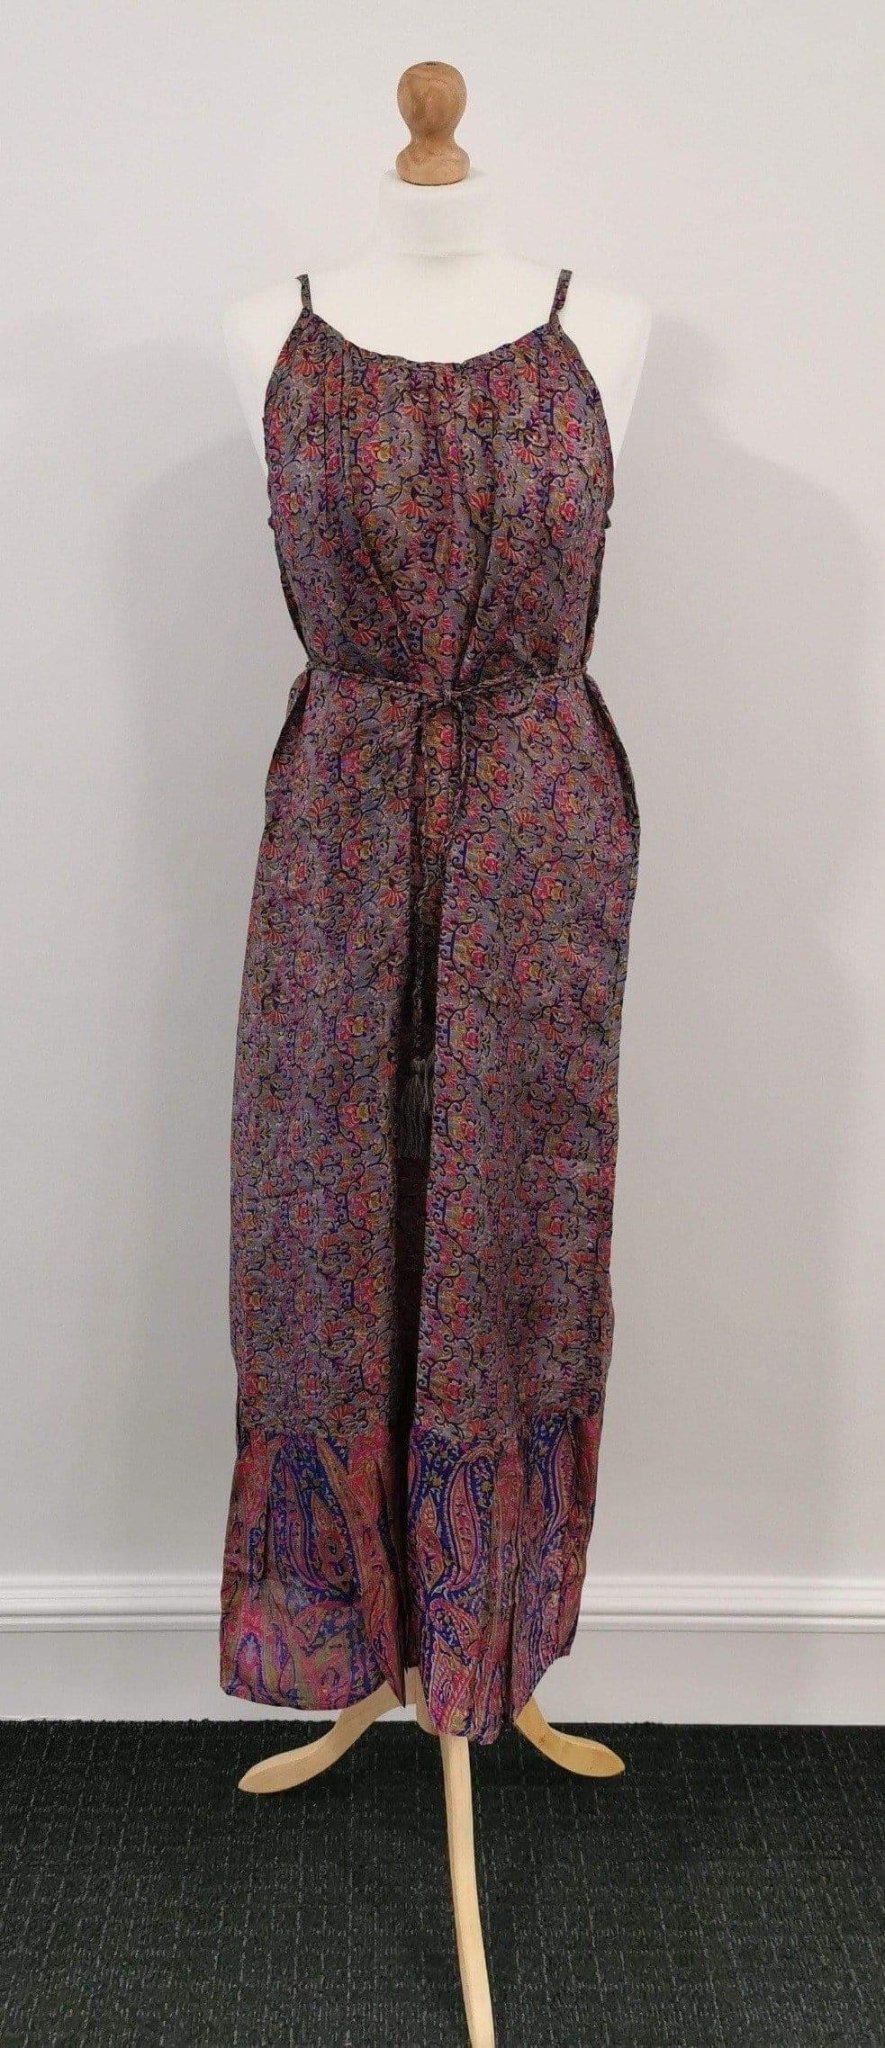 2 Recycled Silk Dresses - Ammpoure Wellbeing